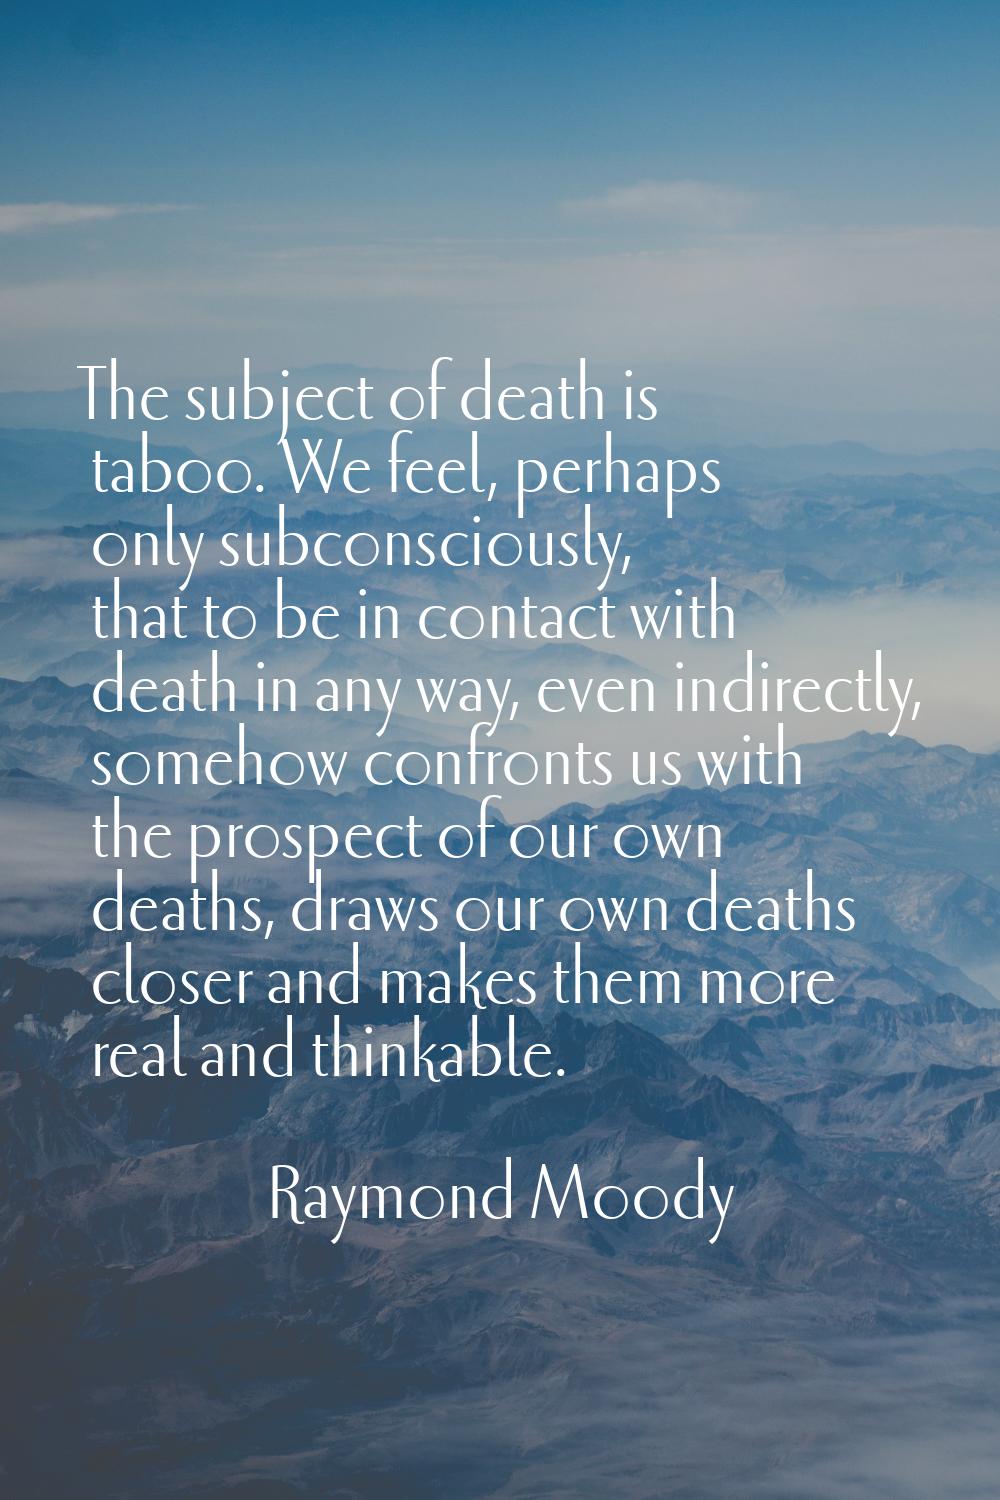 The subject of death is taboo. We feel, perhaps only subconsciously, that to be in contact with dea